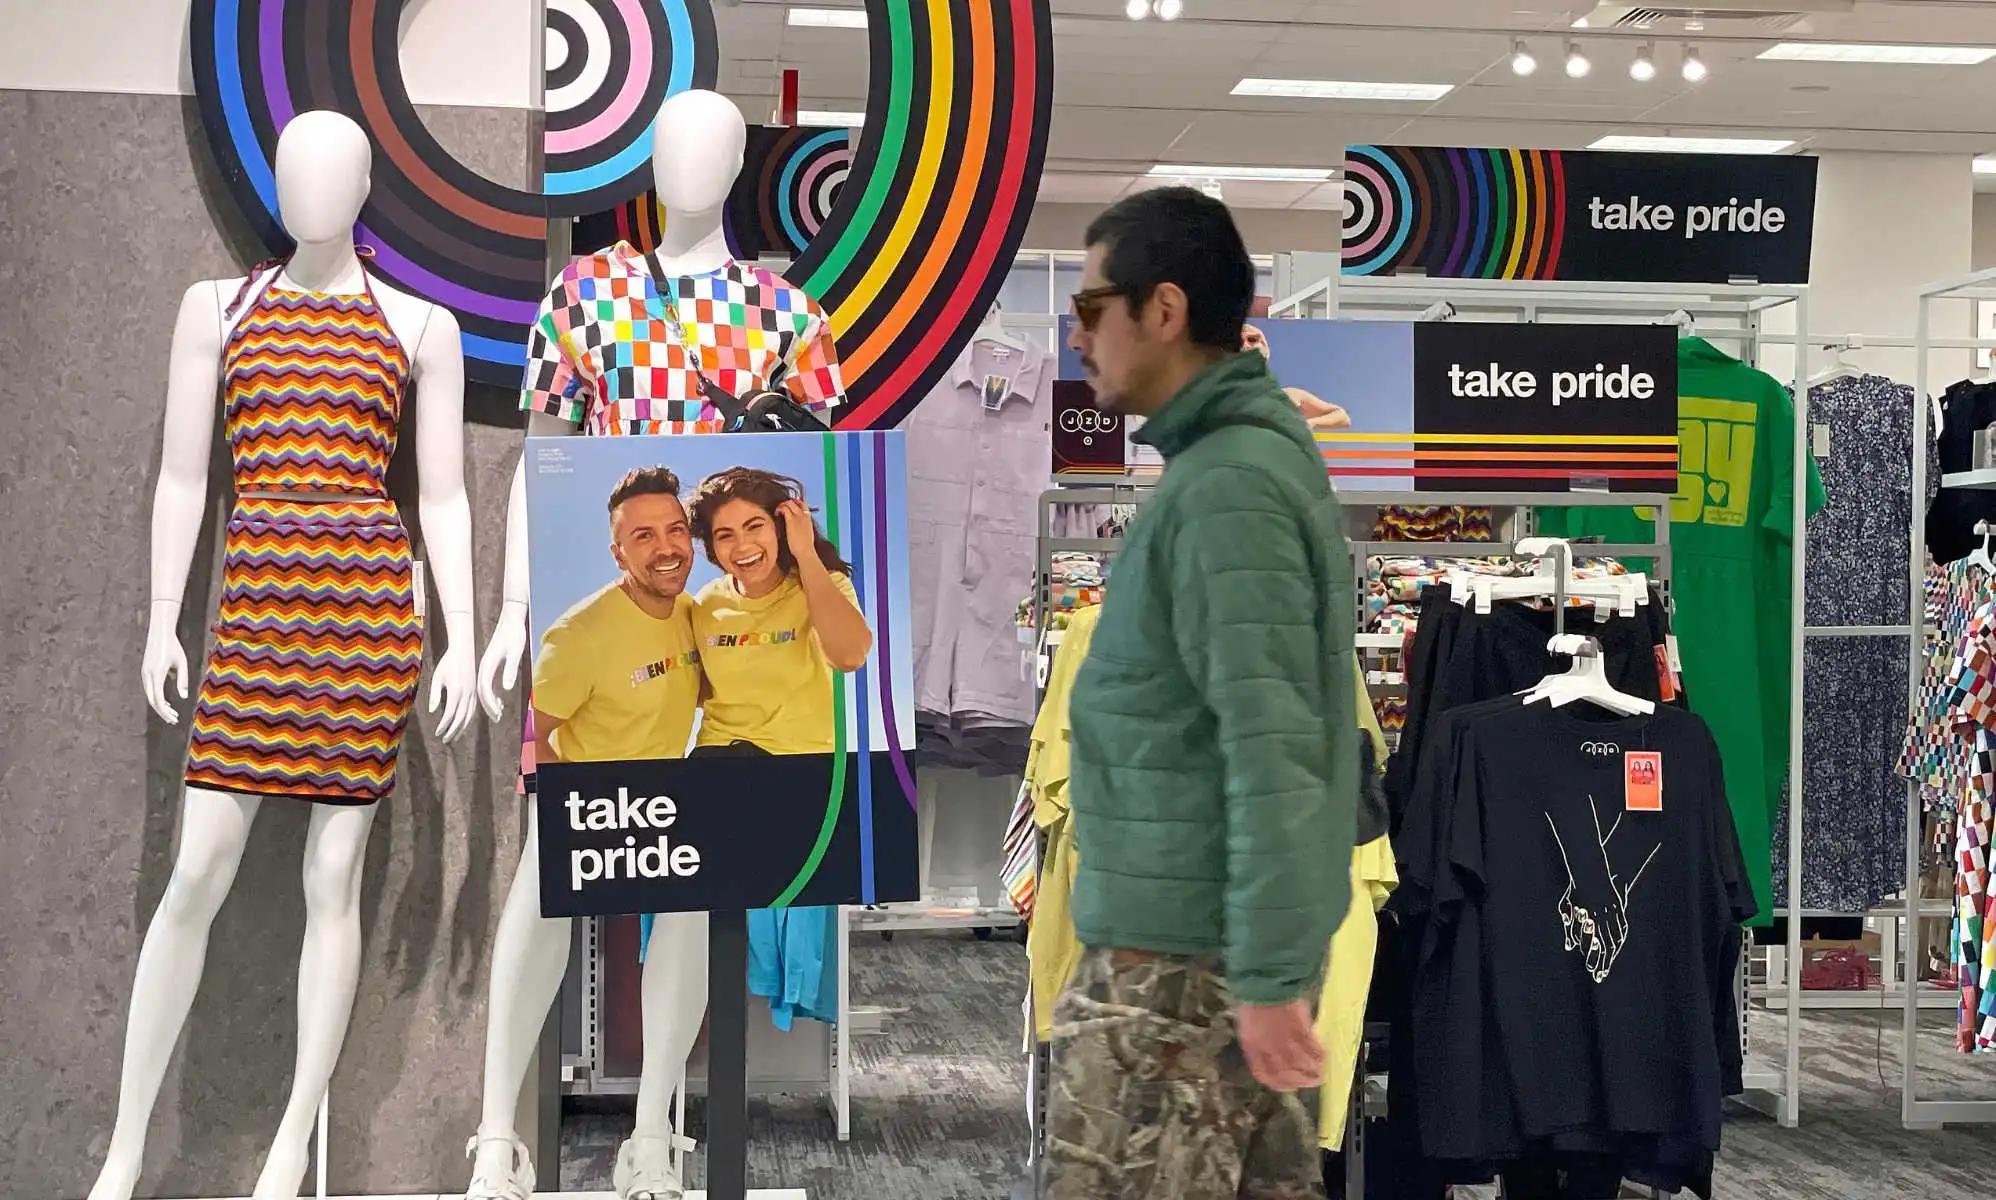 Target to sell Pride range online and in select stores after backlash [Video]